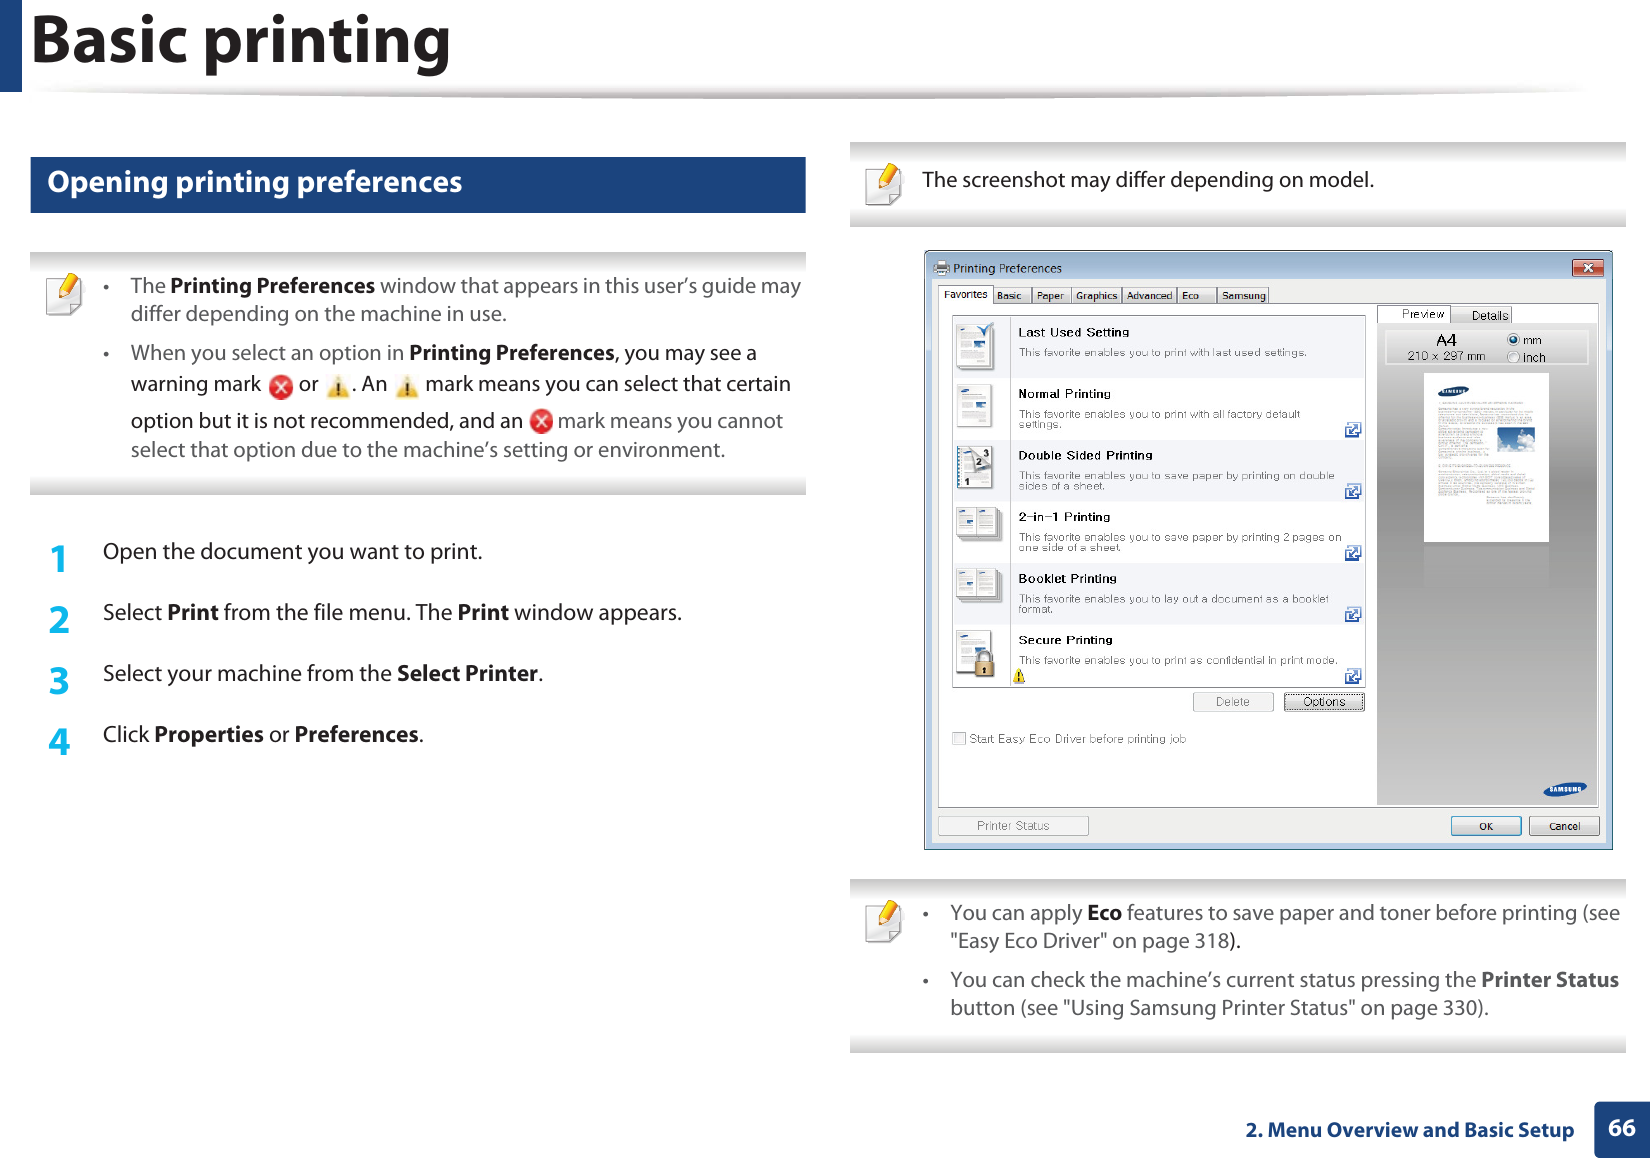 Basic printing662. Menu Overview and Basic Setup12 Opening printing preferences • The Printing Preferences window that appears in this user’s guide may differ depending on the machine in use. • When you select an option in Printing Preferences, you may see a warning mark   or  . An   mark means you can select that certain option but it is not recommended, and an   mark means you cannot select that option due to the machine’s setting or environment. 1Open the document you want to print.2  Select Print from the file menu. The Print window appears. 3  Select your machine from the Select Printer. 4  Click Properties or Preferences.  The screenshot may differ depending on model.  • You can apply Eco features to save paper and toner before printing (see &quot;Easy Eco Driver&quot; on page 318).• You can check the machine’s current status pressing the Printer Status button (see &quot;Using Samsung Printer Status&quot; on page 330). 